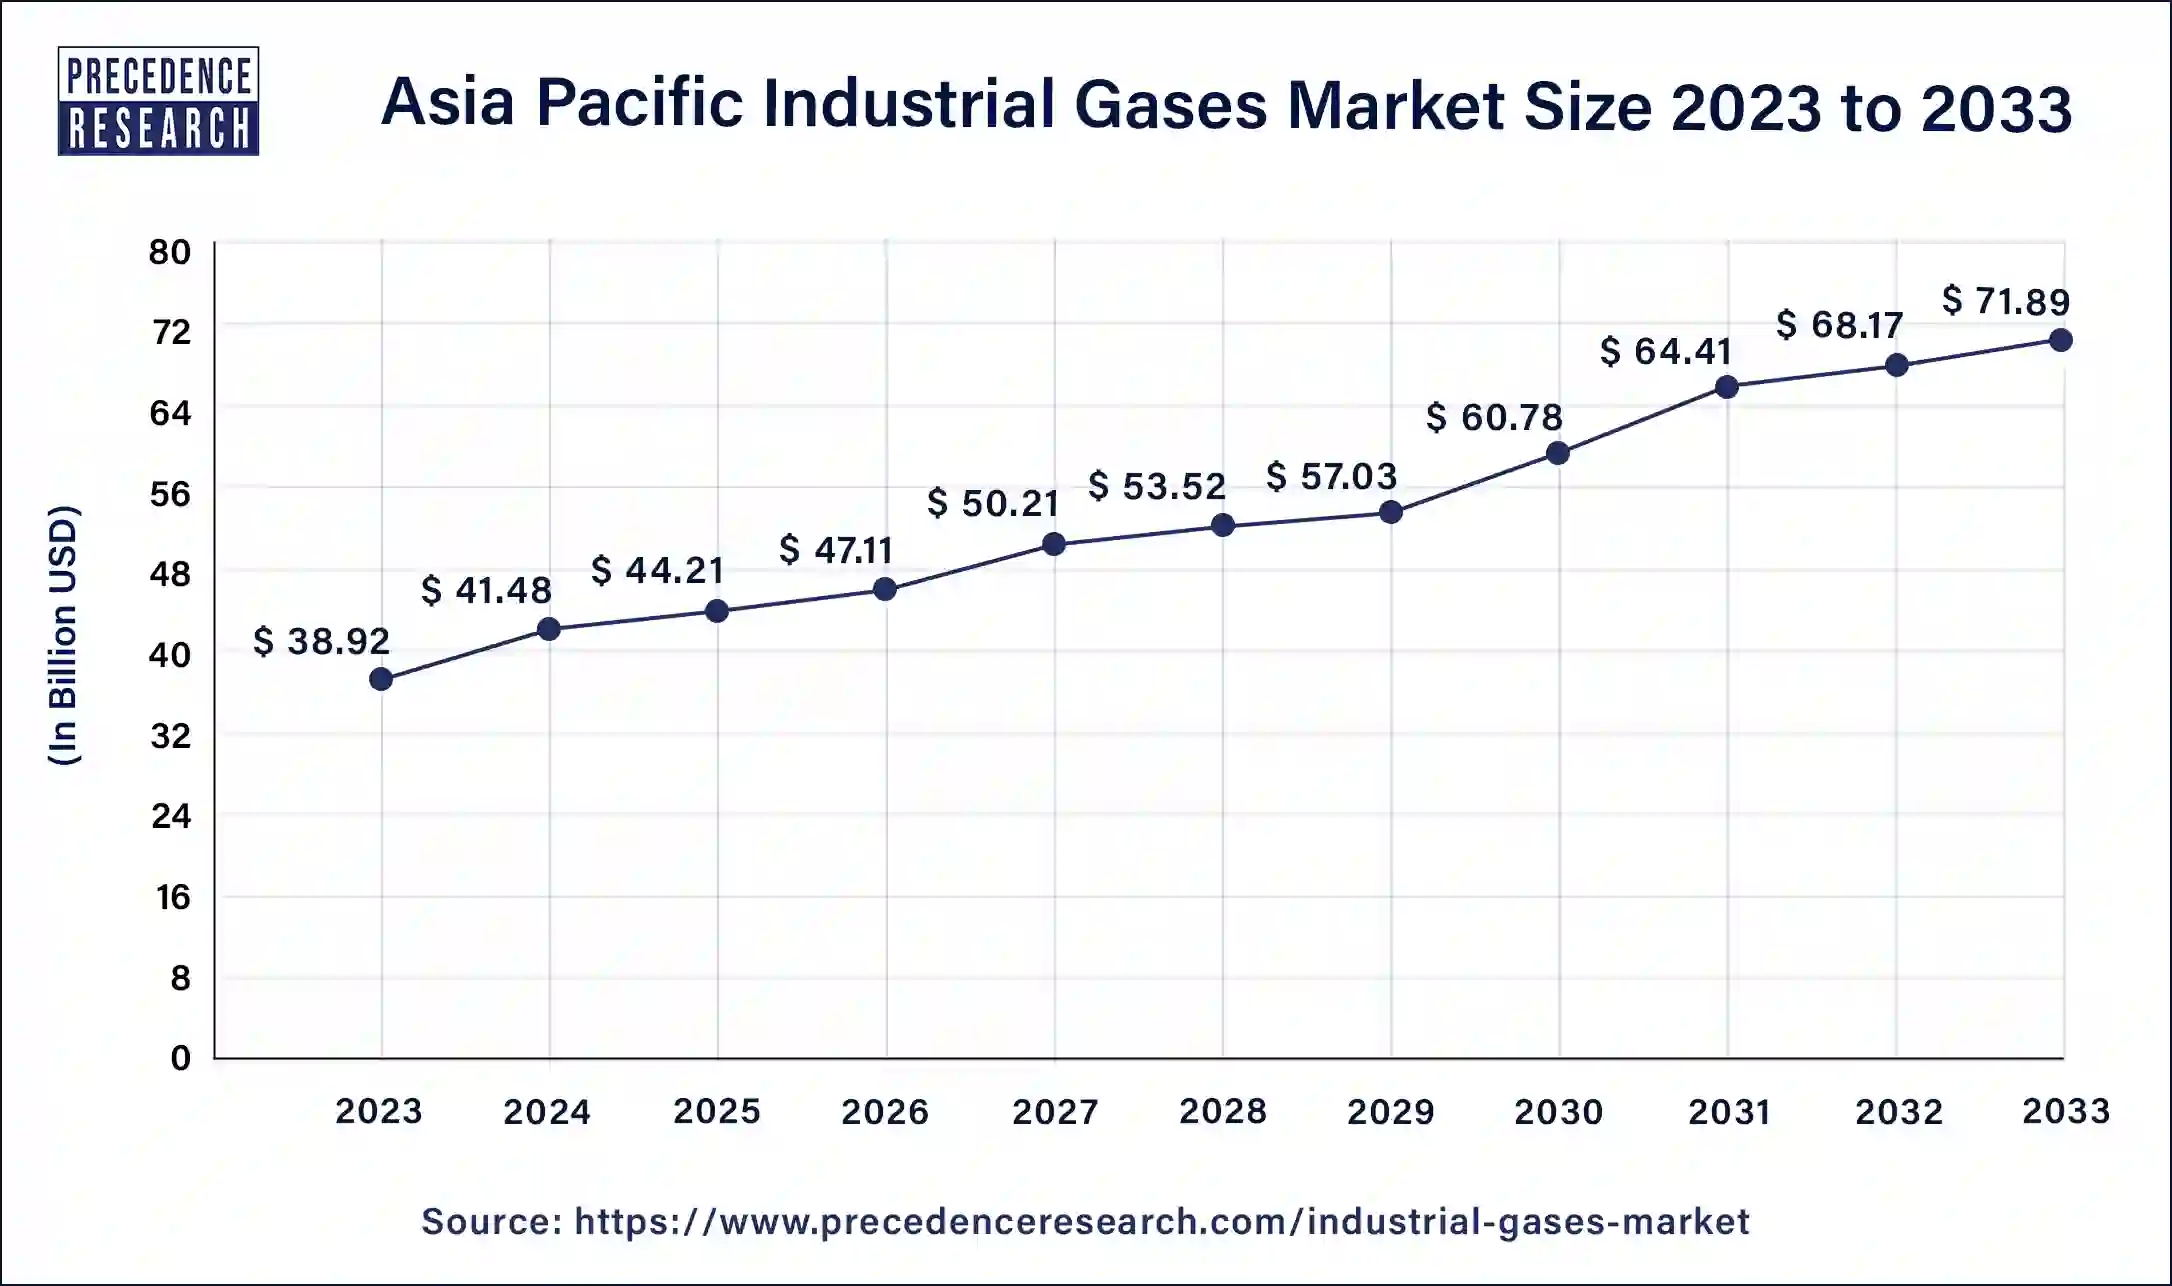 Asia Pacific Industrial Gases Market Size 2024 to 2033